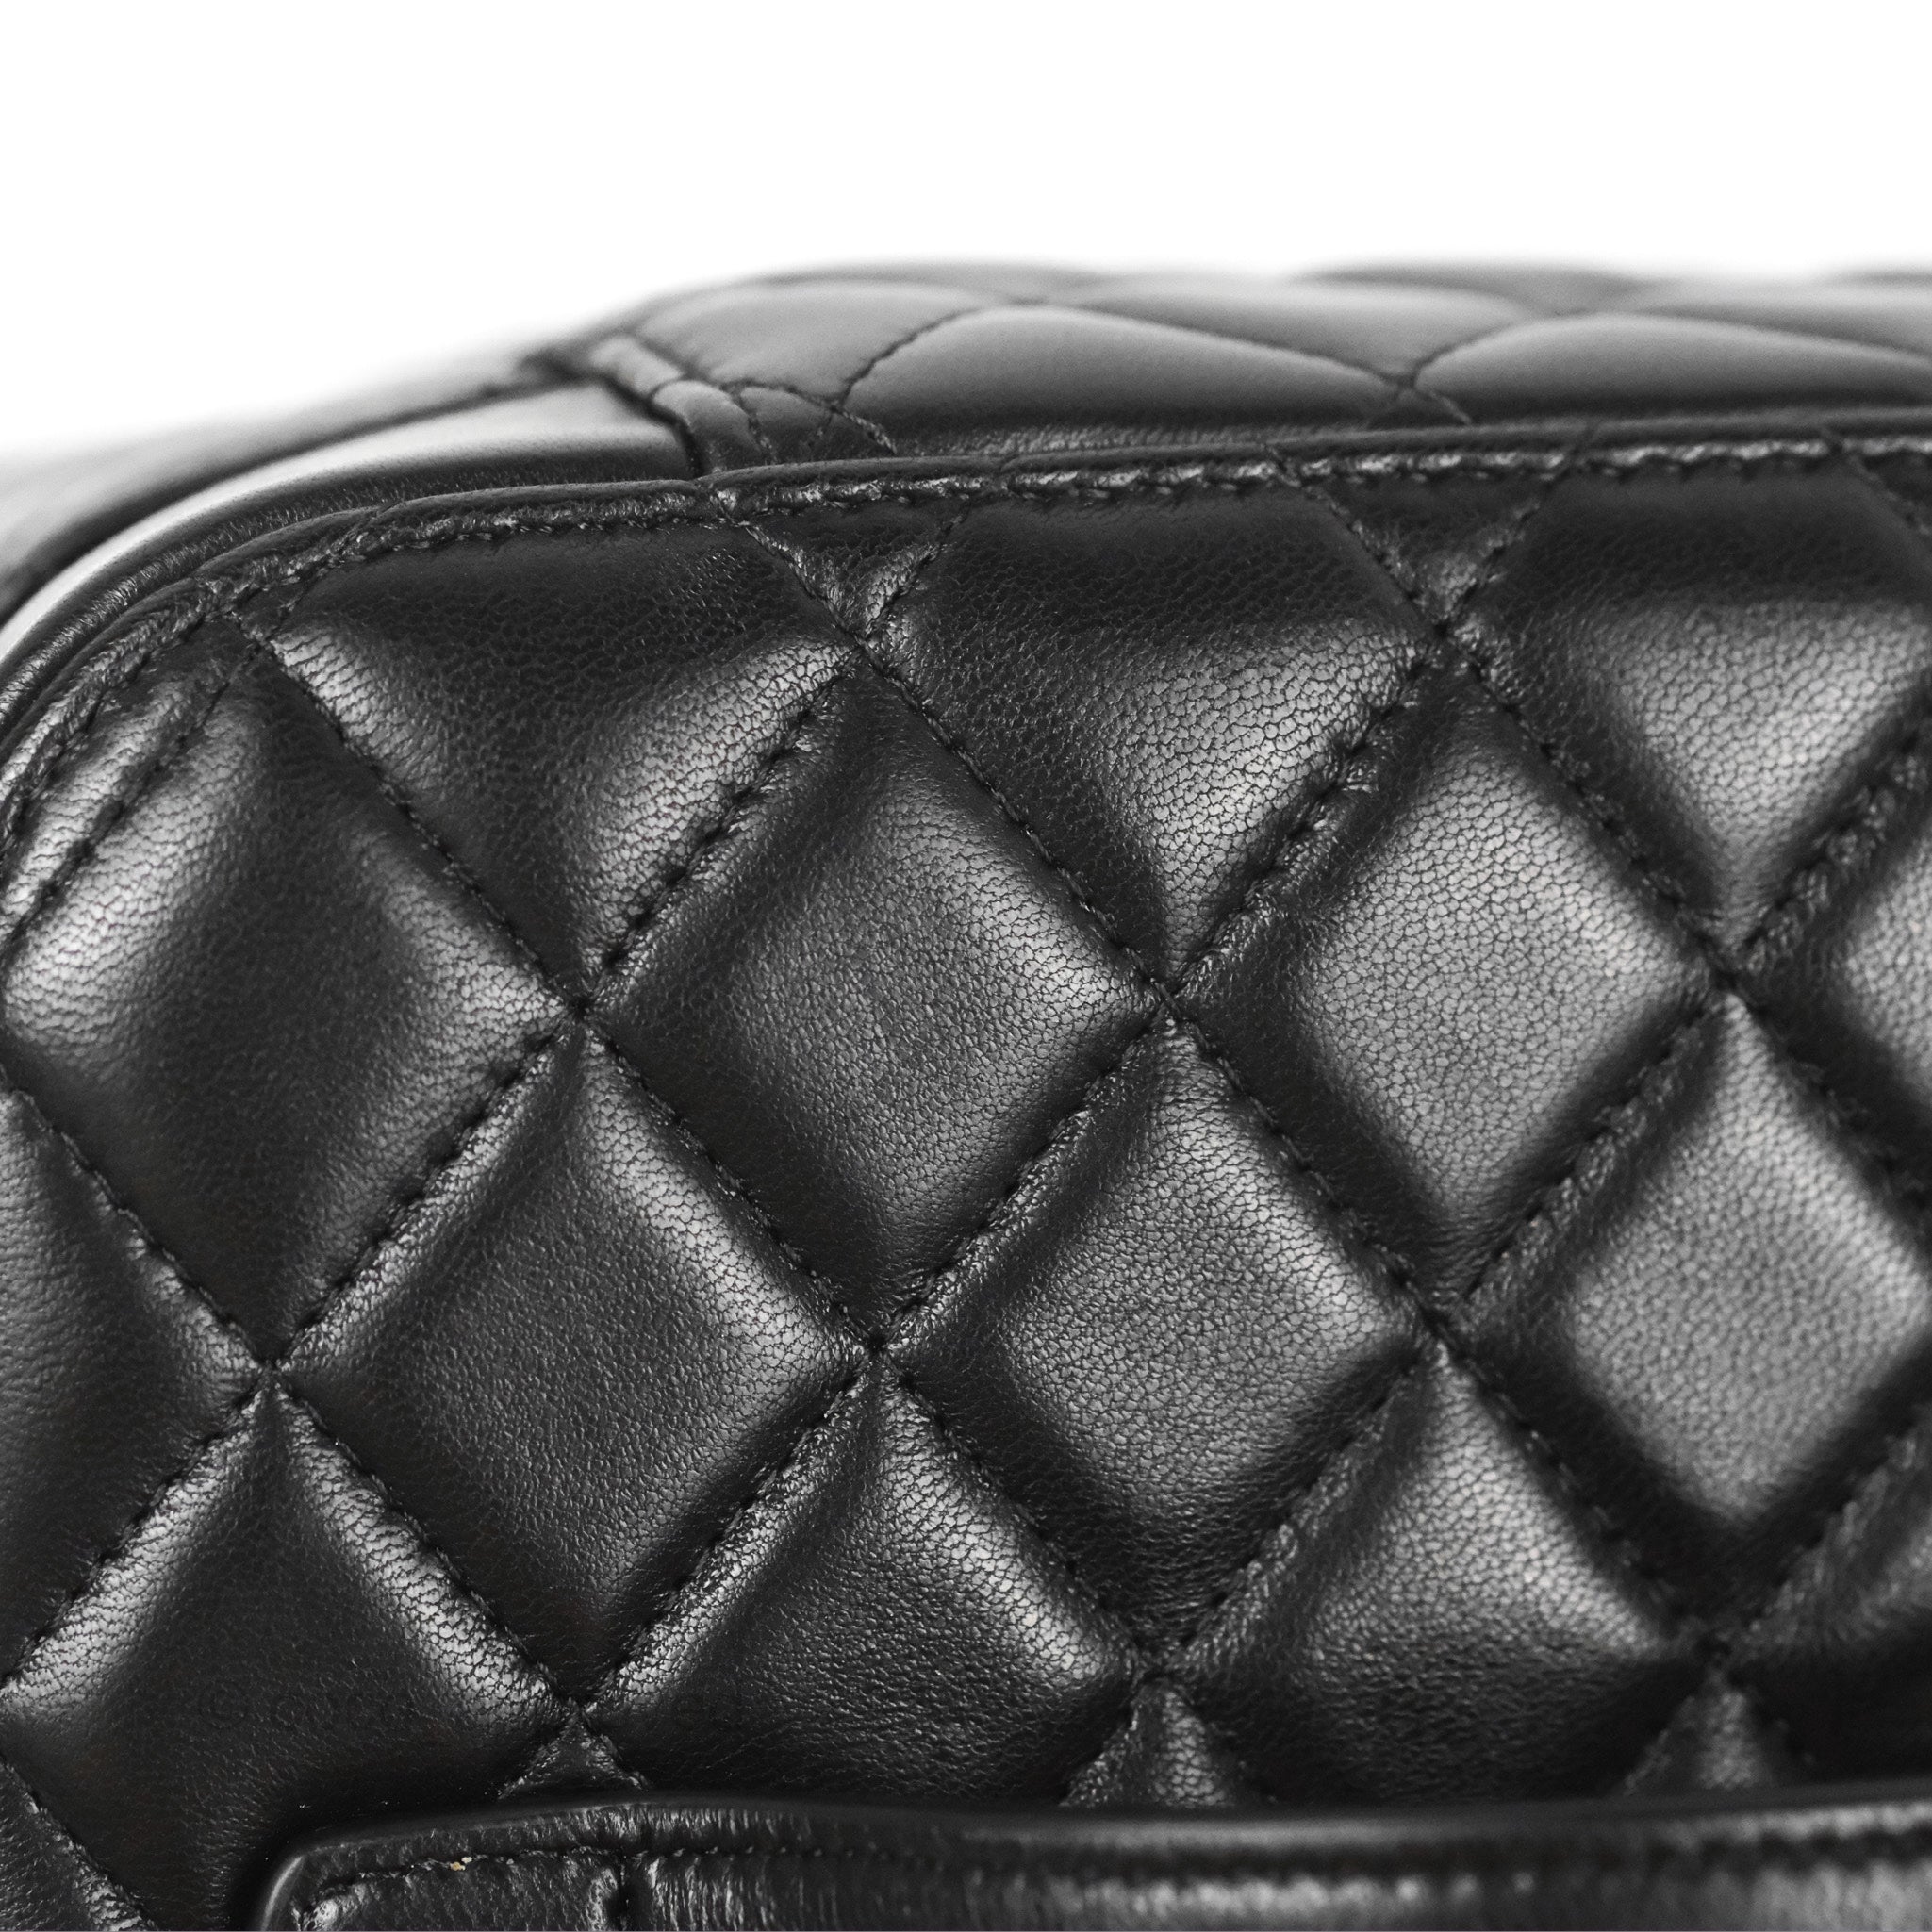 Chanel Classic Cosmetic Vanity Pouch Quilted Black Lambskin Gold Hardw –  Coco Approved Studio